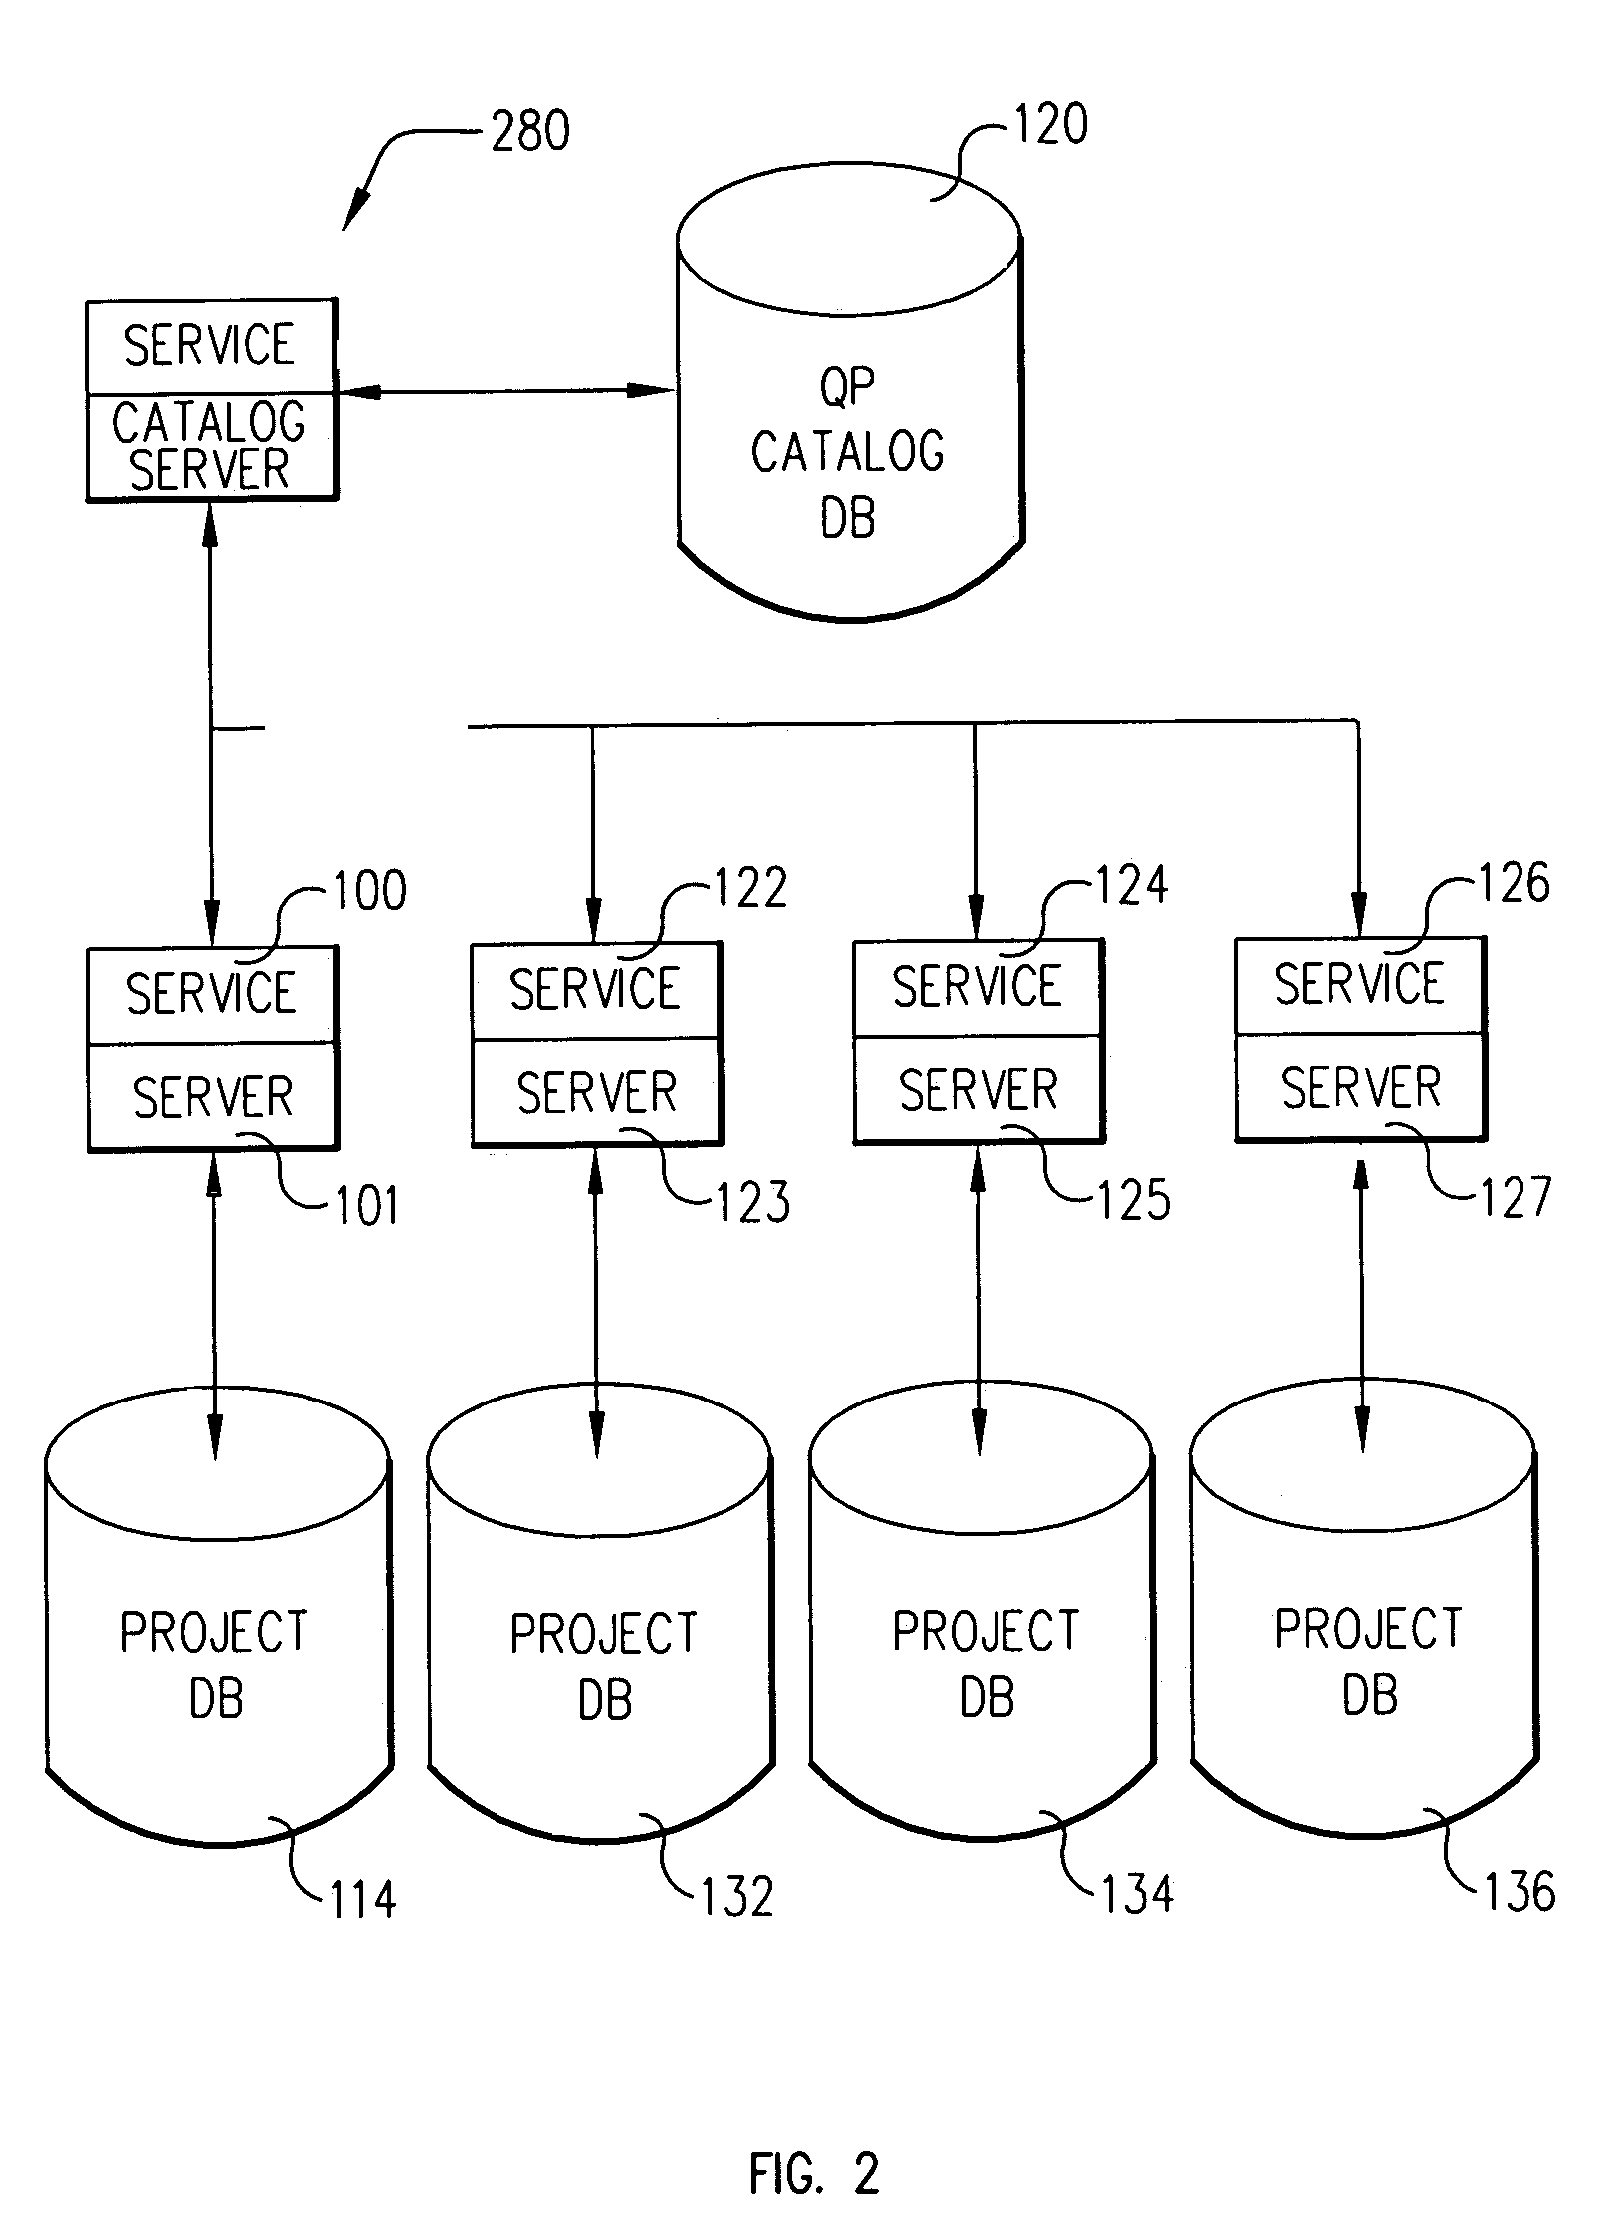 System and method for command line administration of project spaces using XML objects